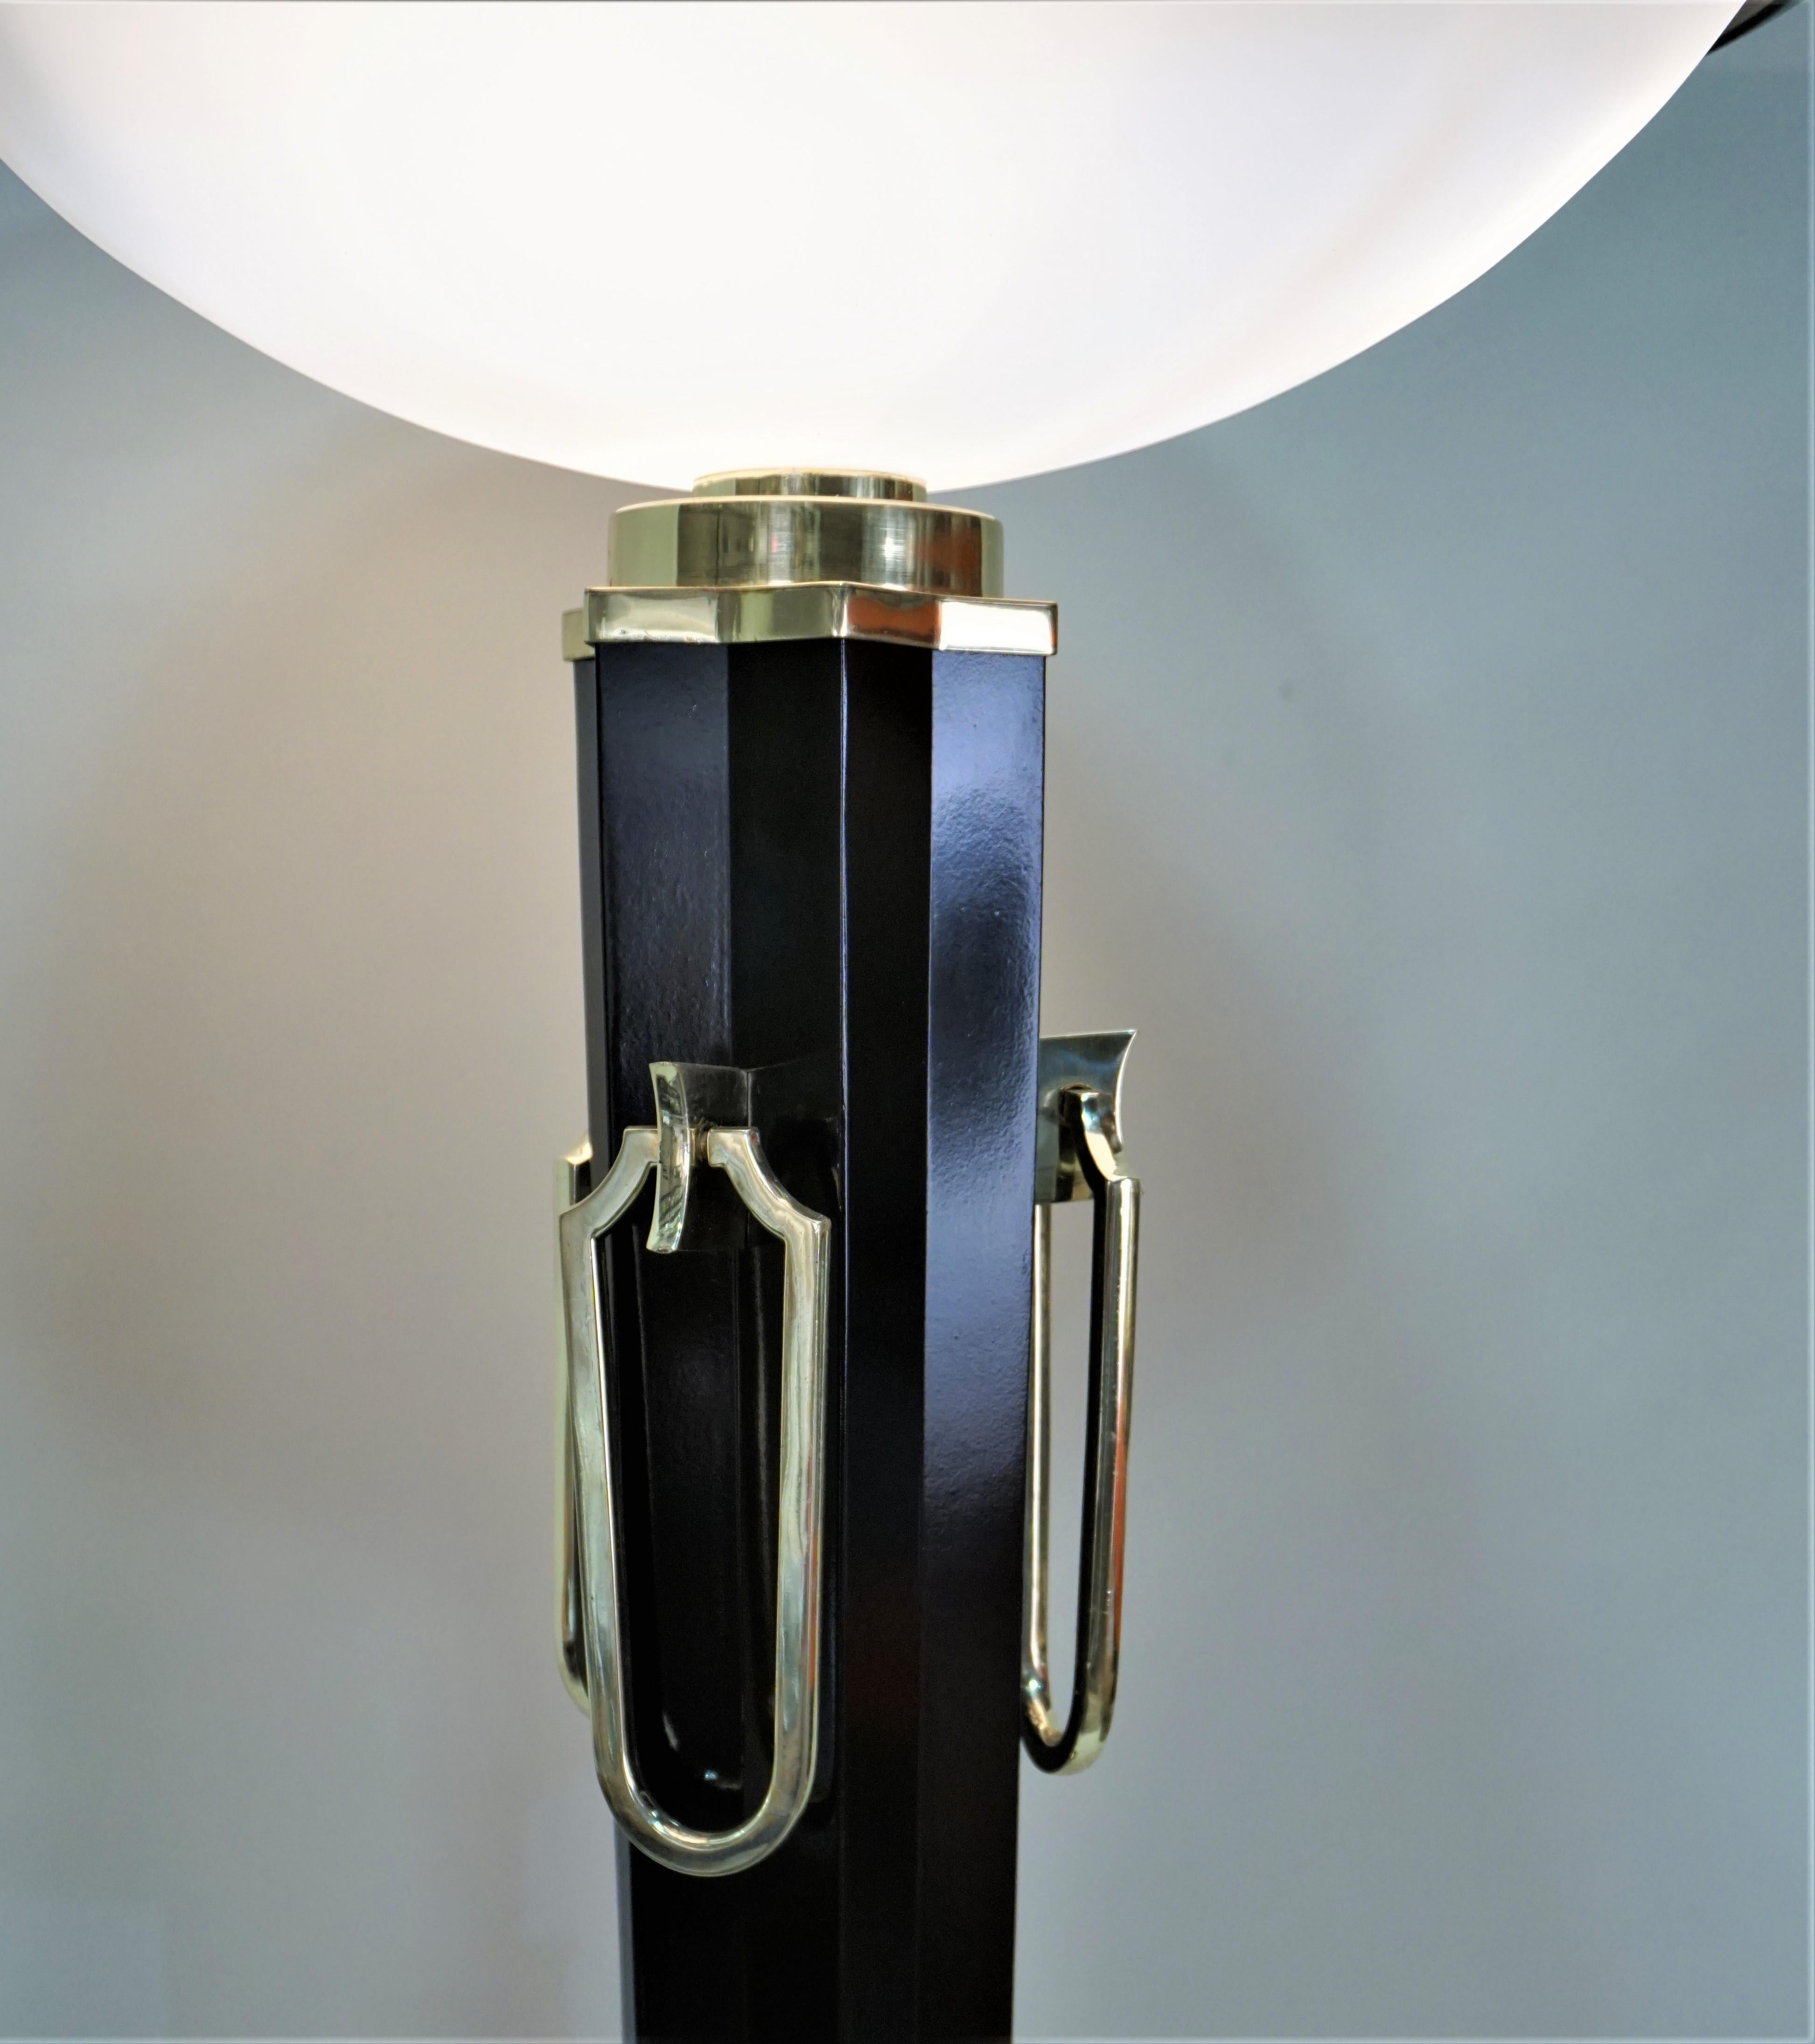 Lacquered French 1930s Art Deco Torchiere Floor Lamp